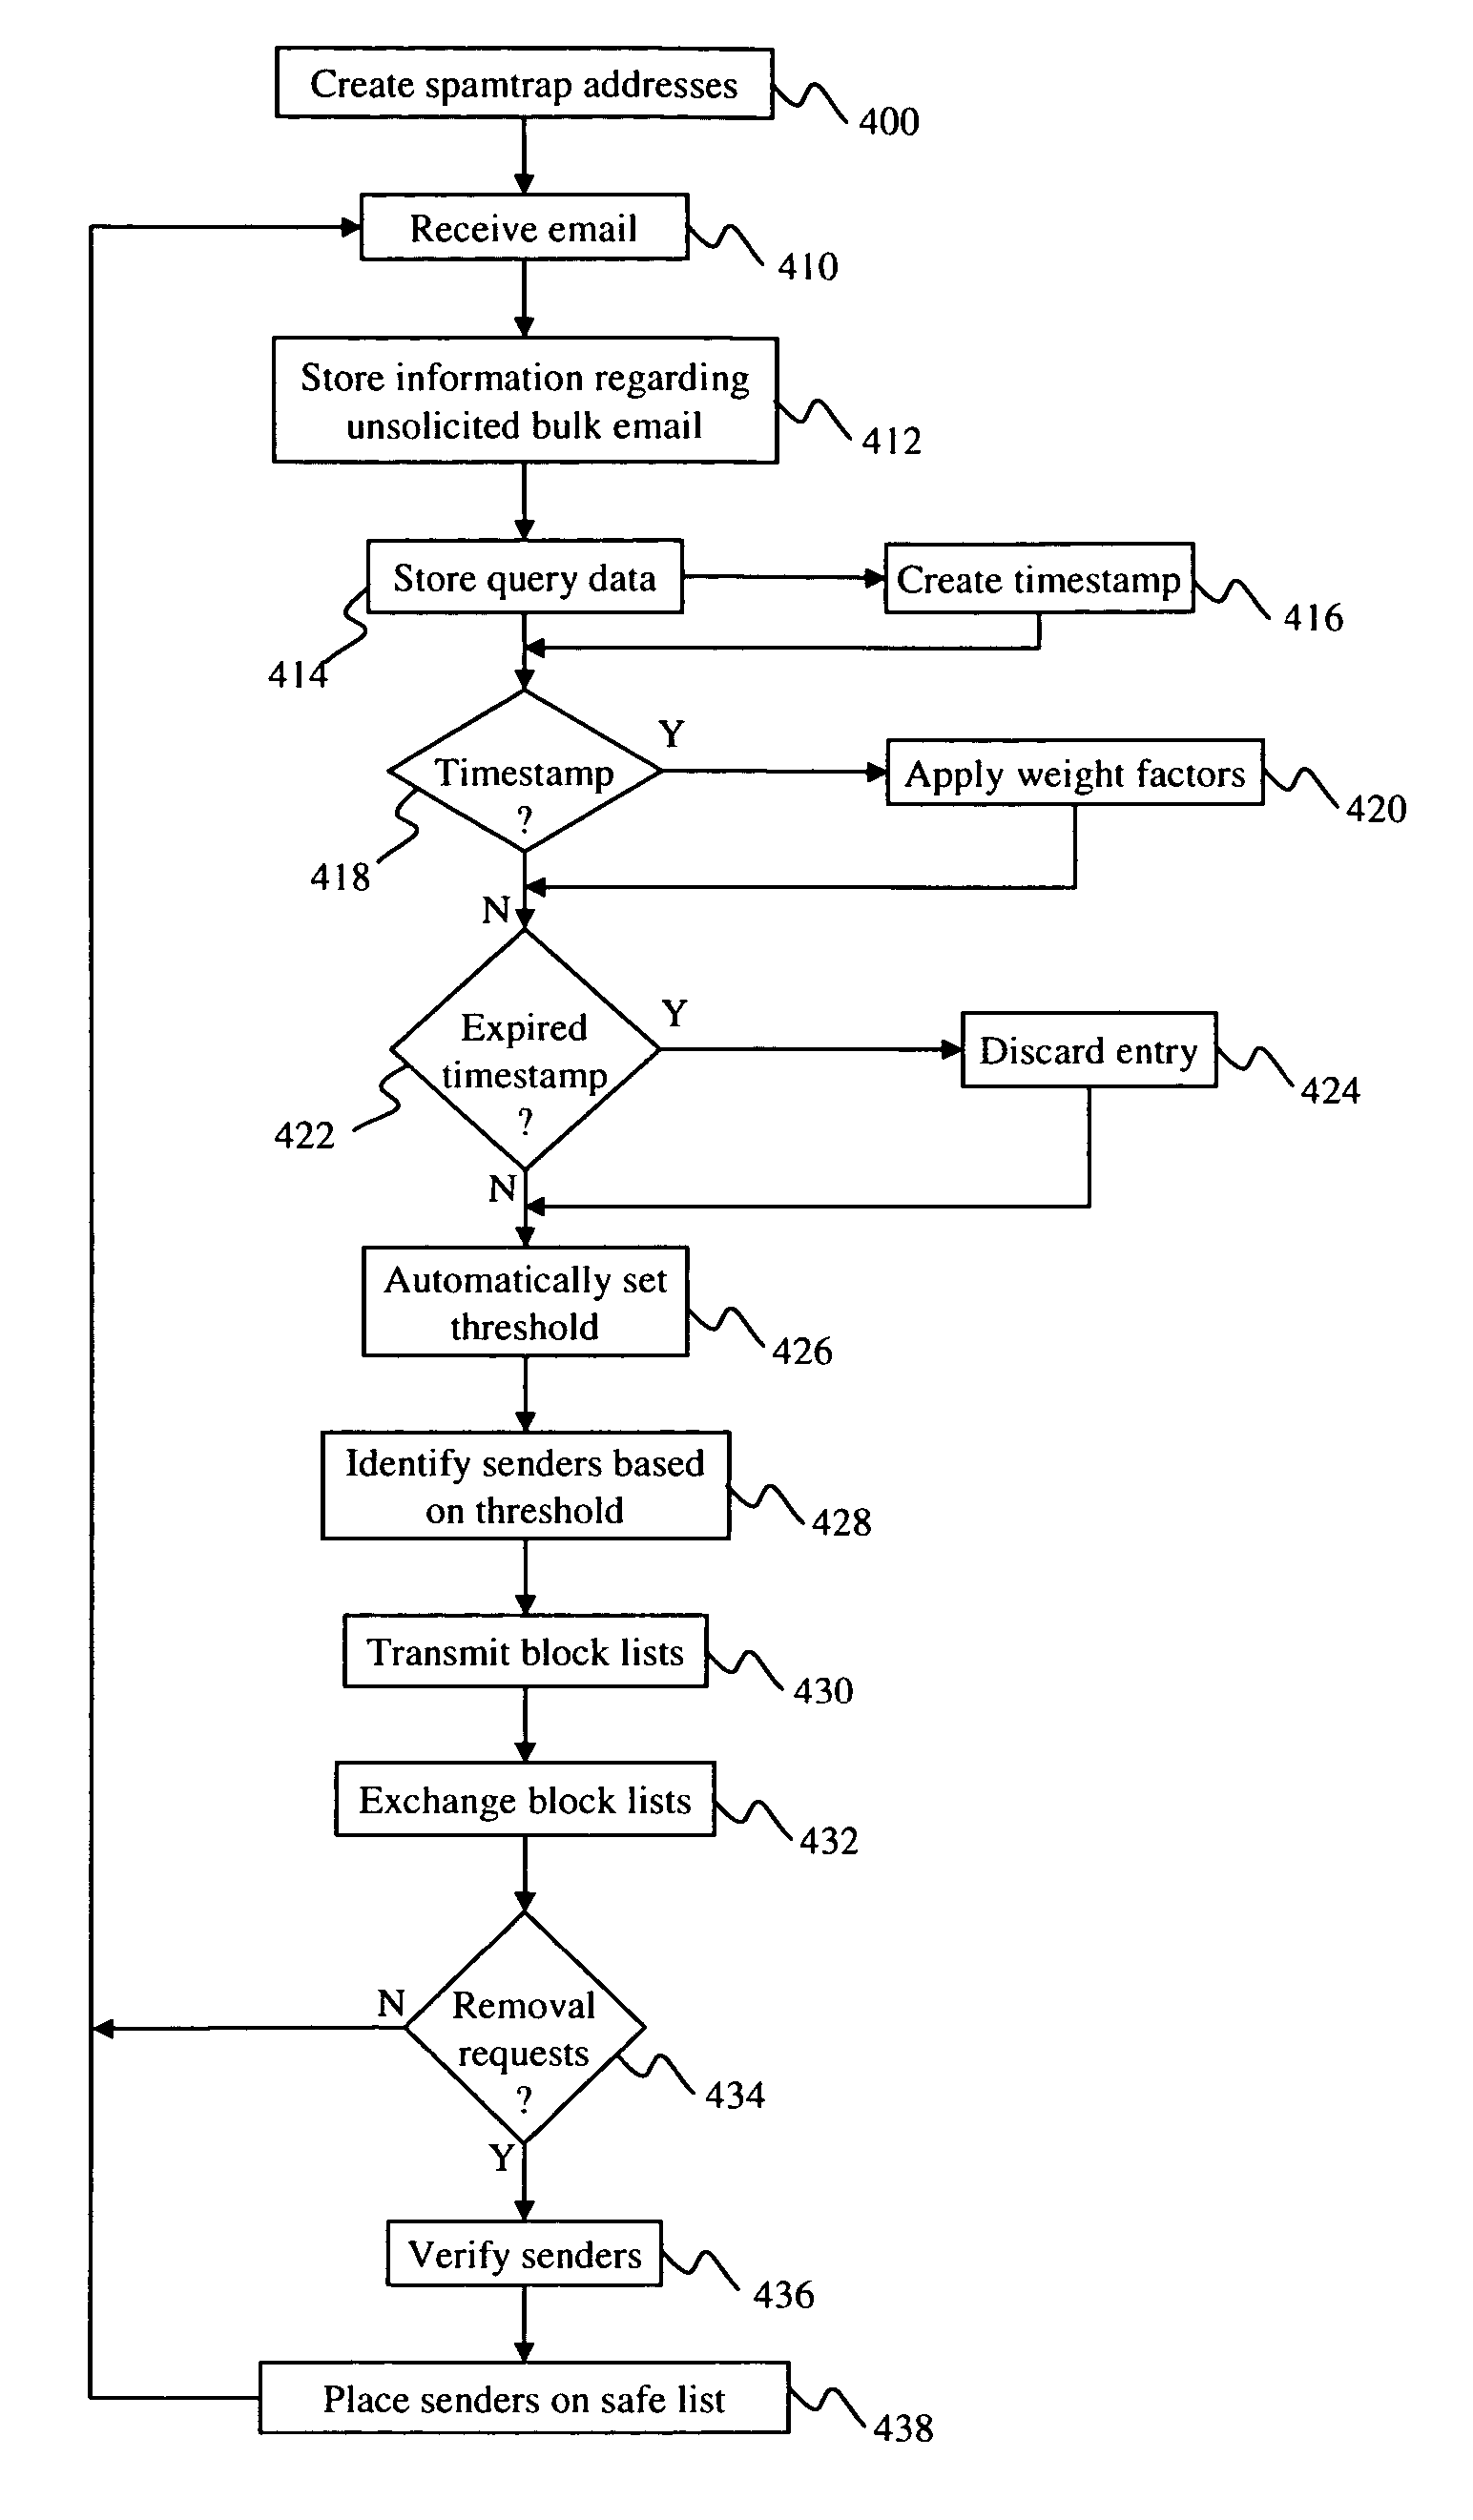 Self-tuning statistical method and system for blocking spam